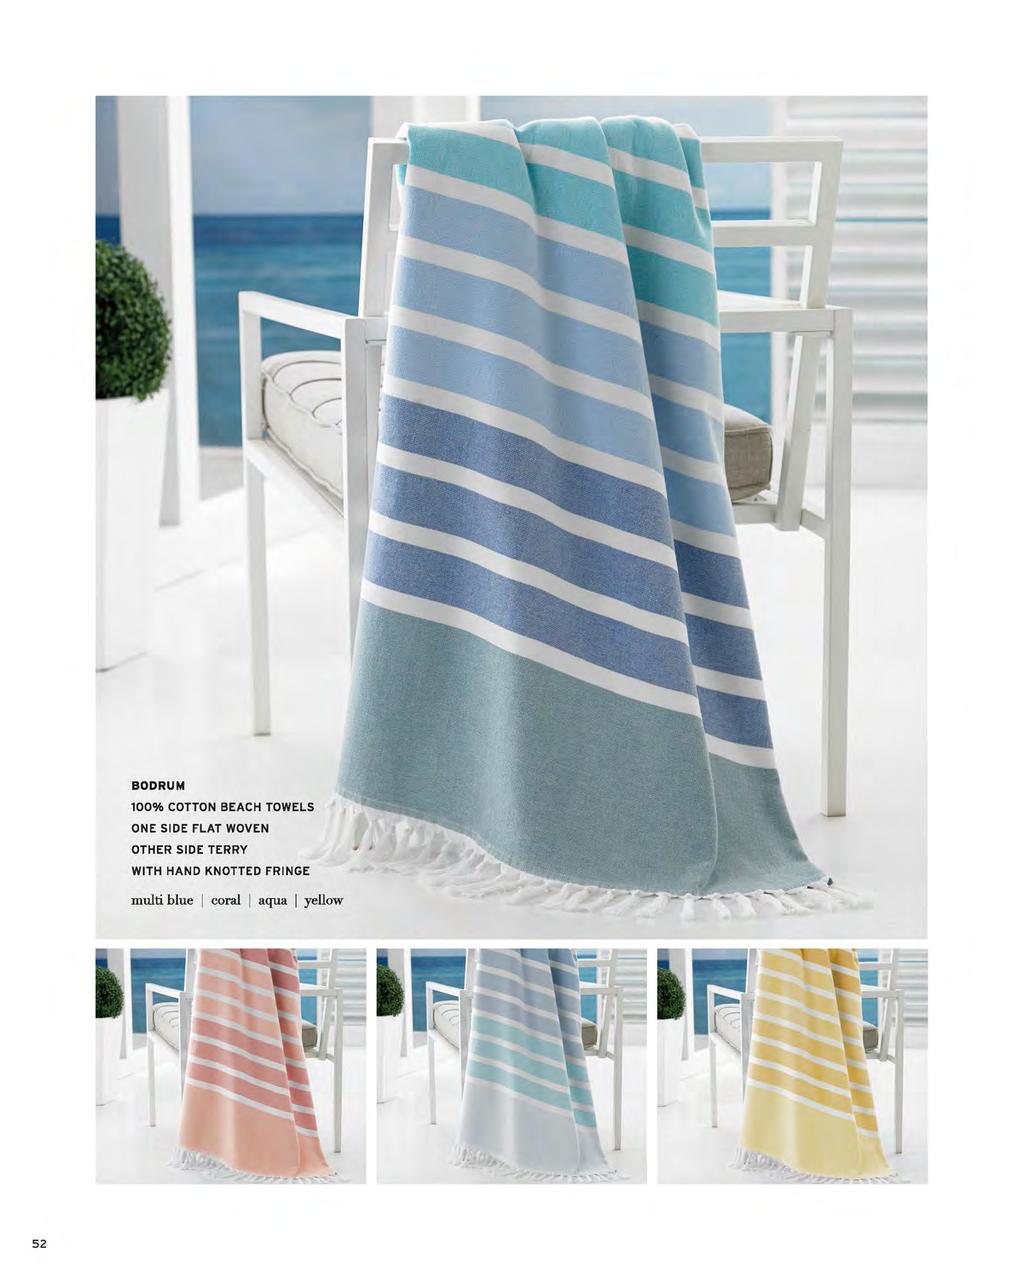 BODRUM 100% COTTON BEACH TOWELS ONE SIDE FLAT WOVEN OTHER SIDE